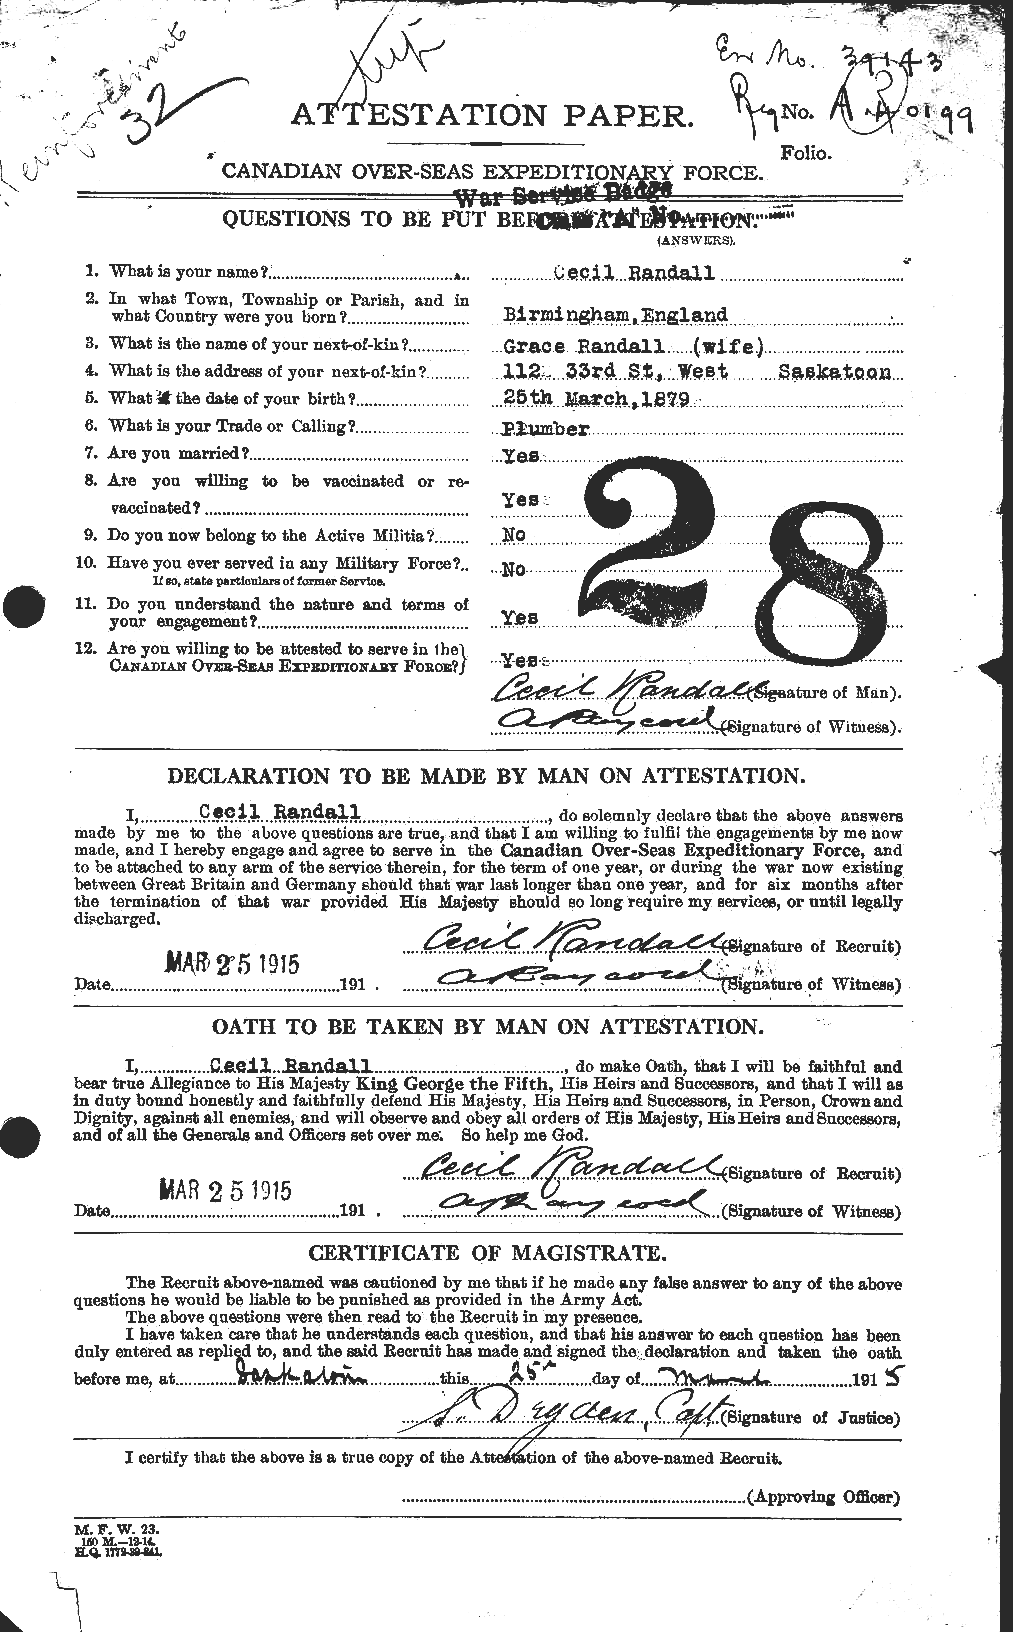 Personnel Records of the First World War - CEF 593367a